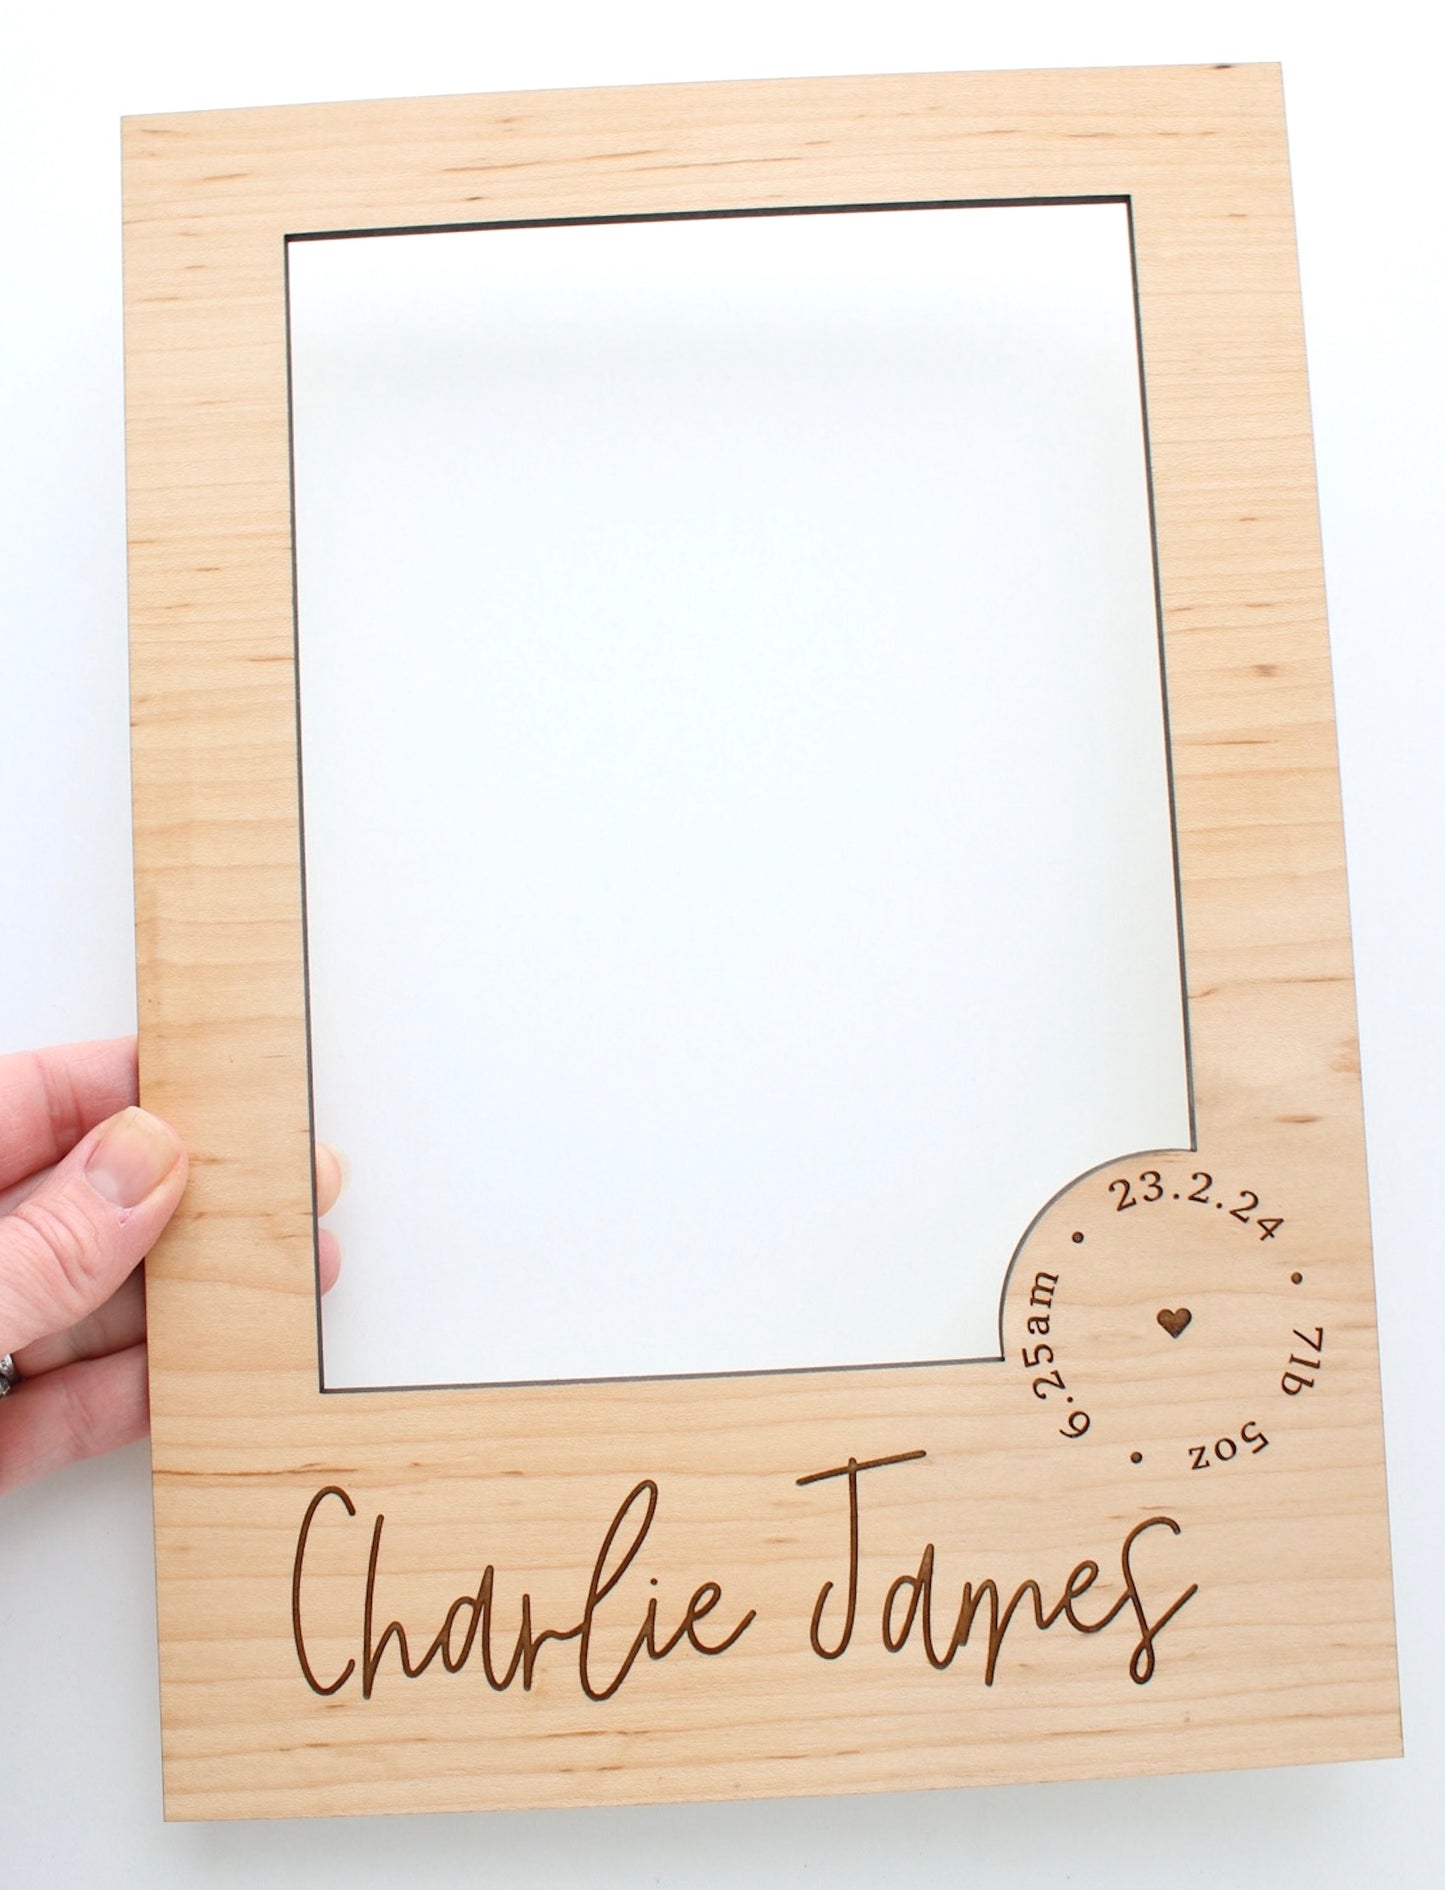 Personalised wooden picture mount for a new baby photo frame